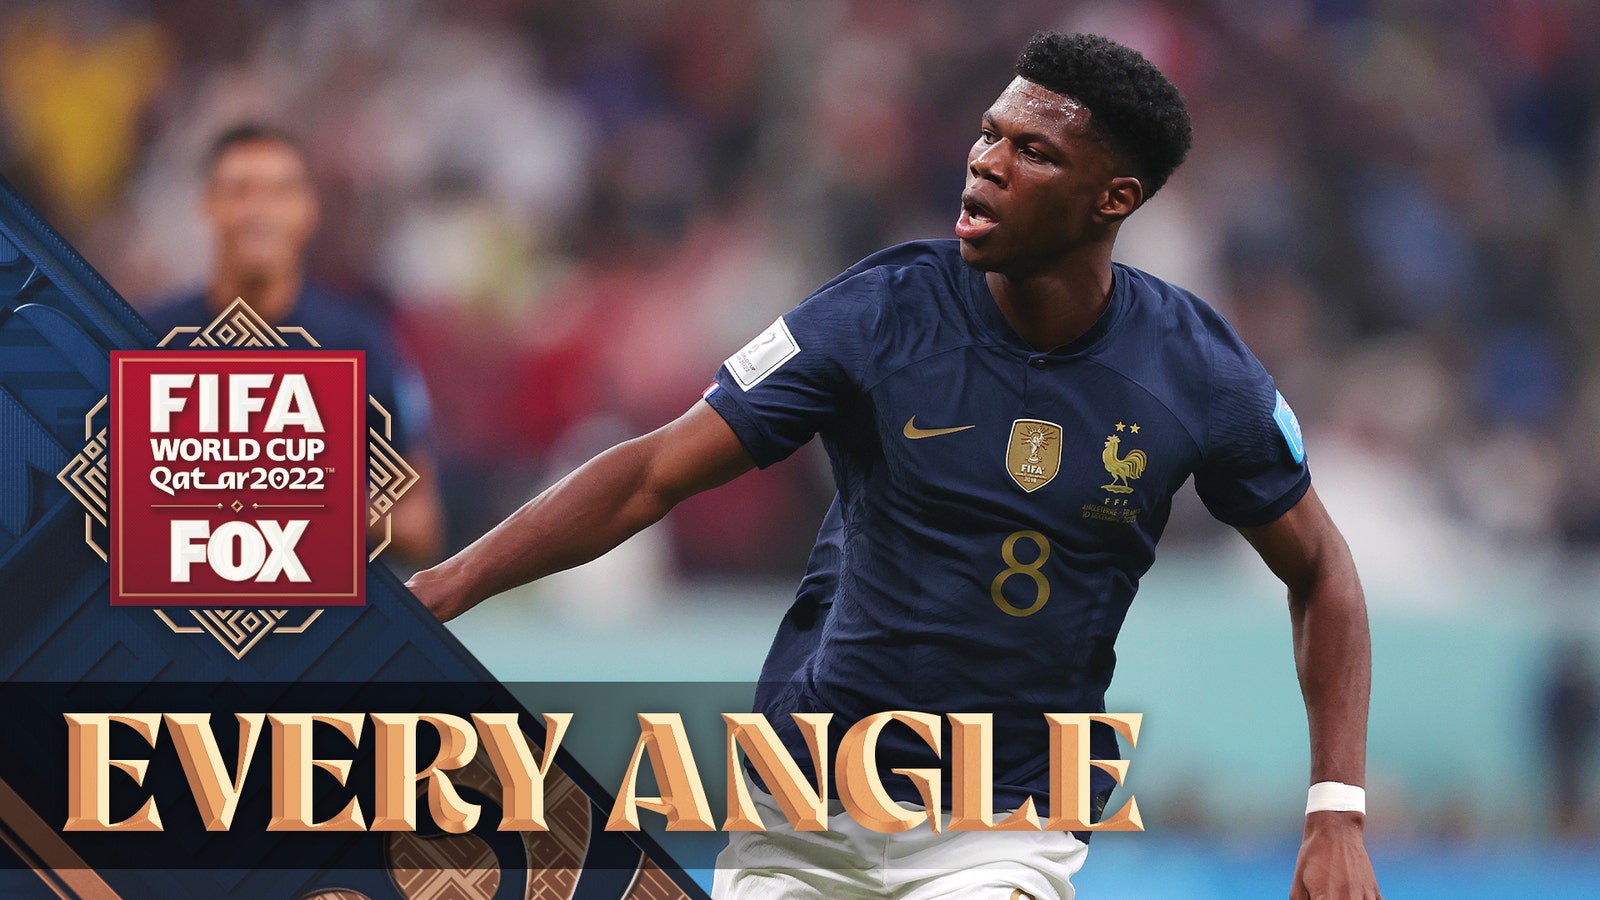 Aurelien Tchouameni makes a statement after scoring for France at the 2022 FIFA World Cup |  every angle